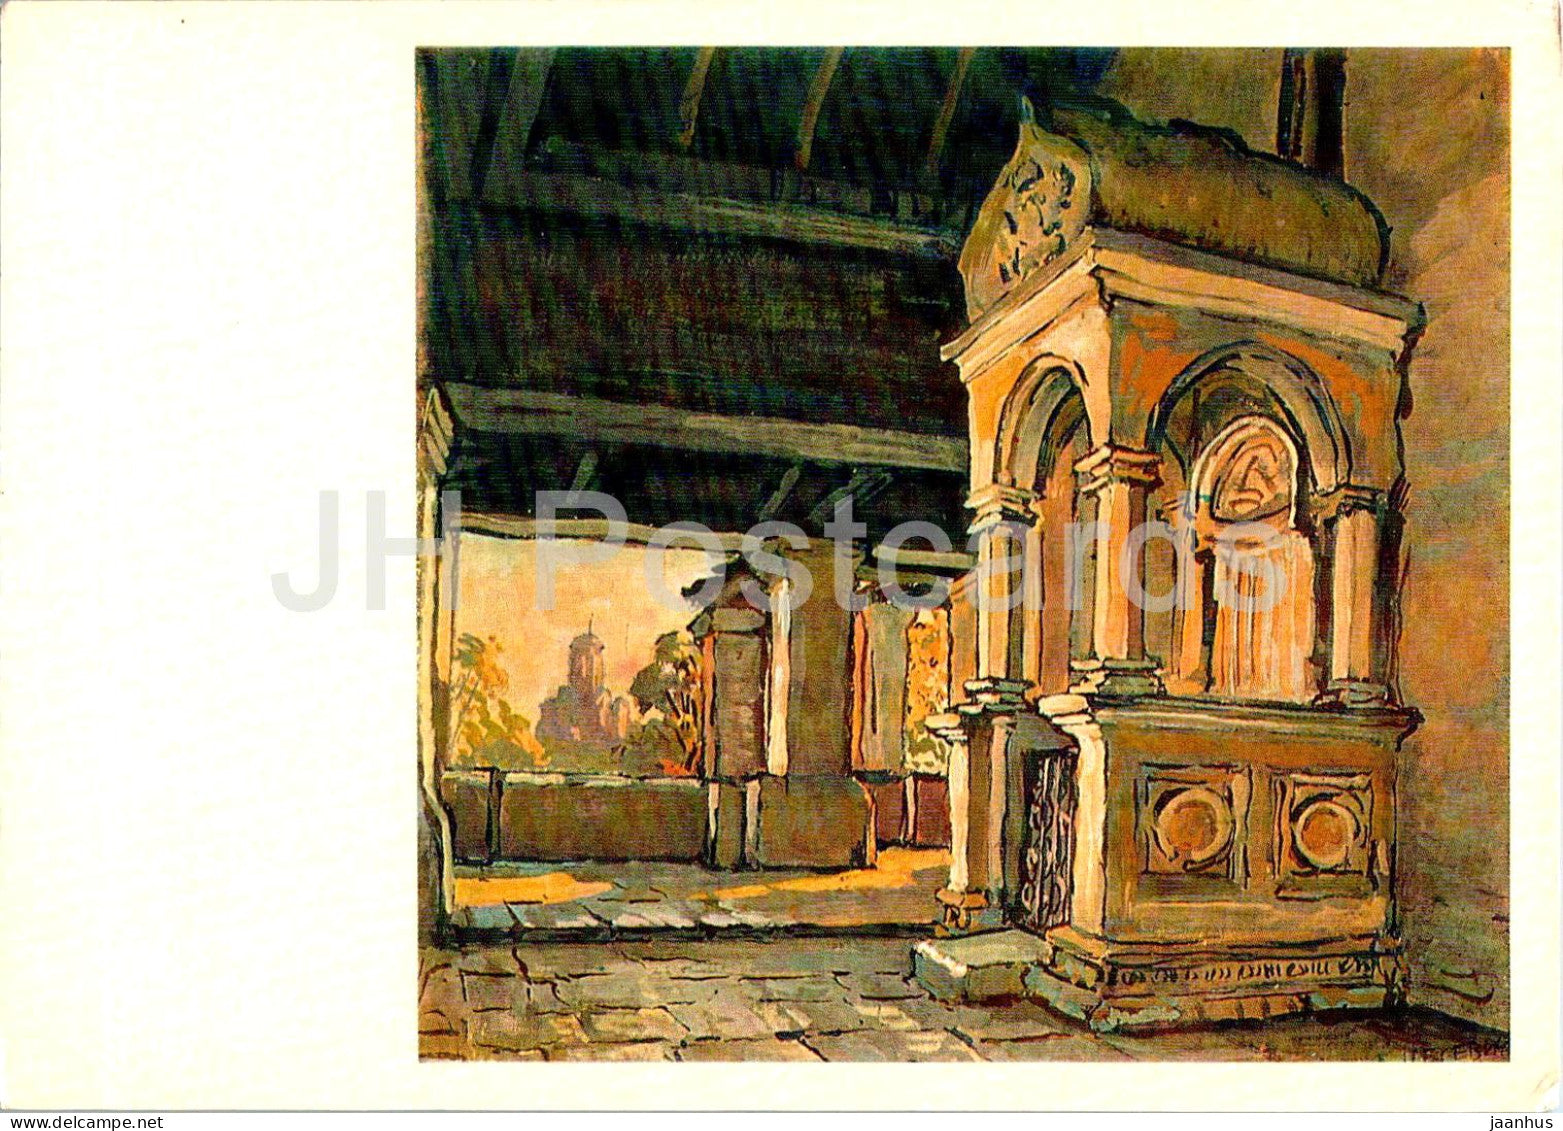 Kolomenskoye - The Palace of the Tsar - illustration by A. Tsesevich - 1972 - Russia USSR - unused - JH Postcards